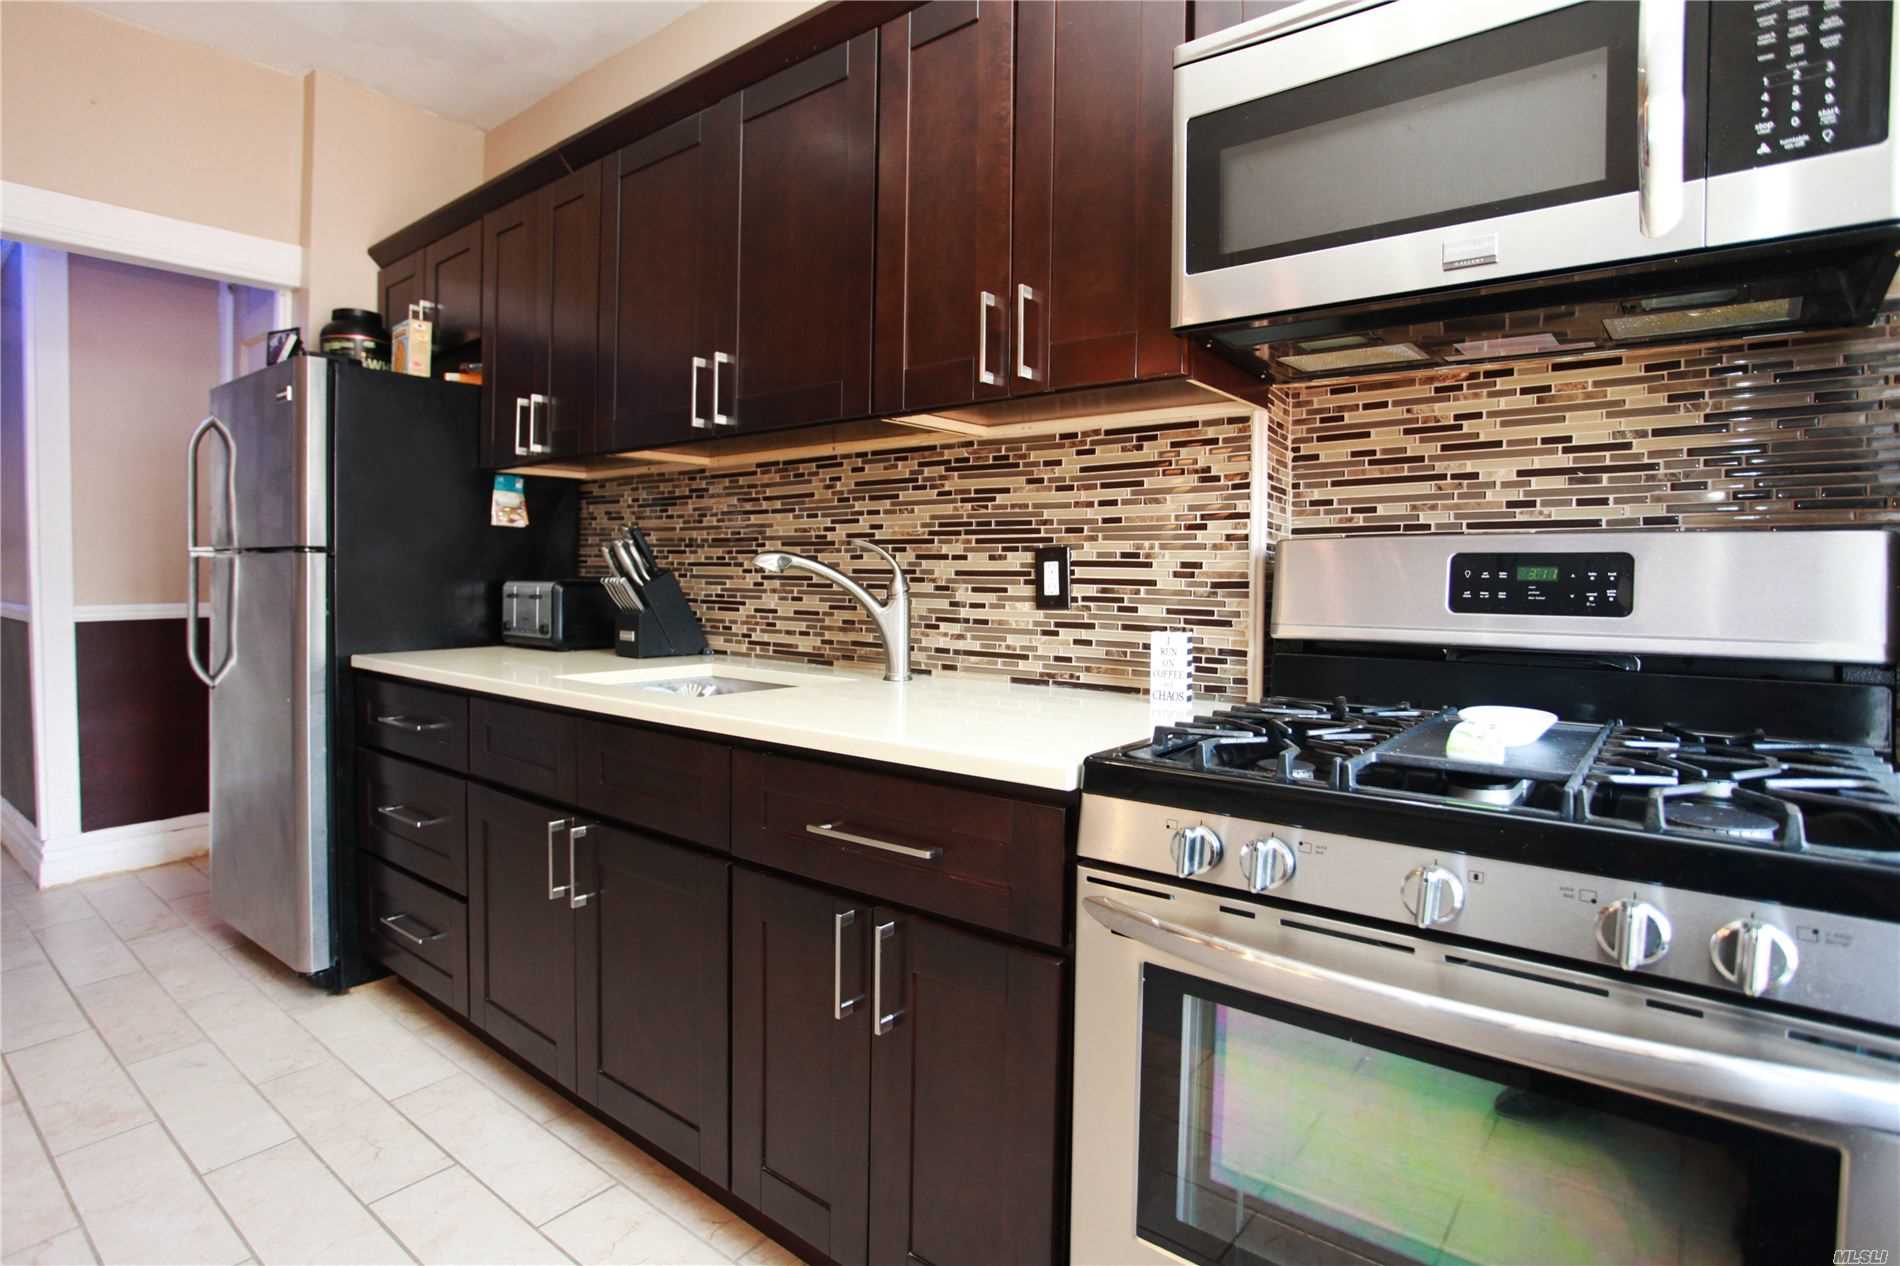 a kitchen with stainless steel appliances wooden cabinets and a stove top oven